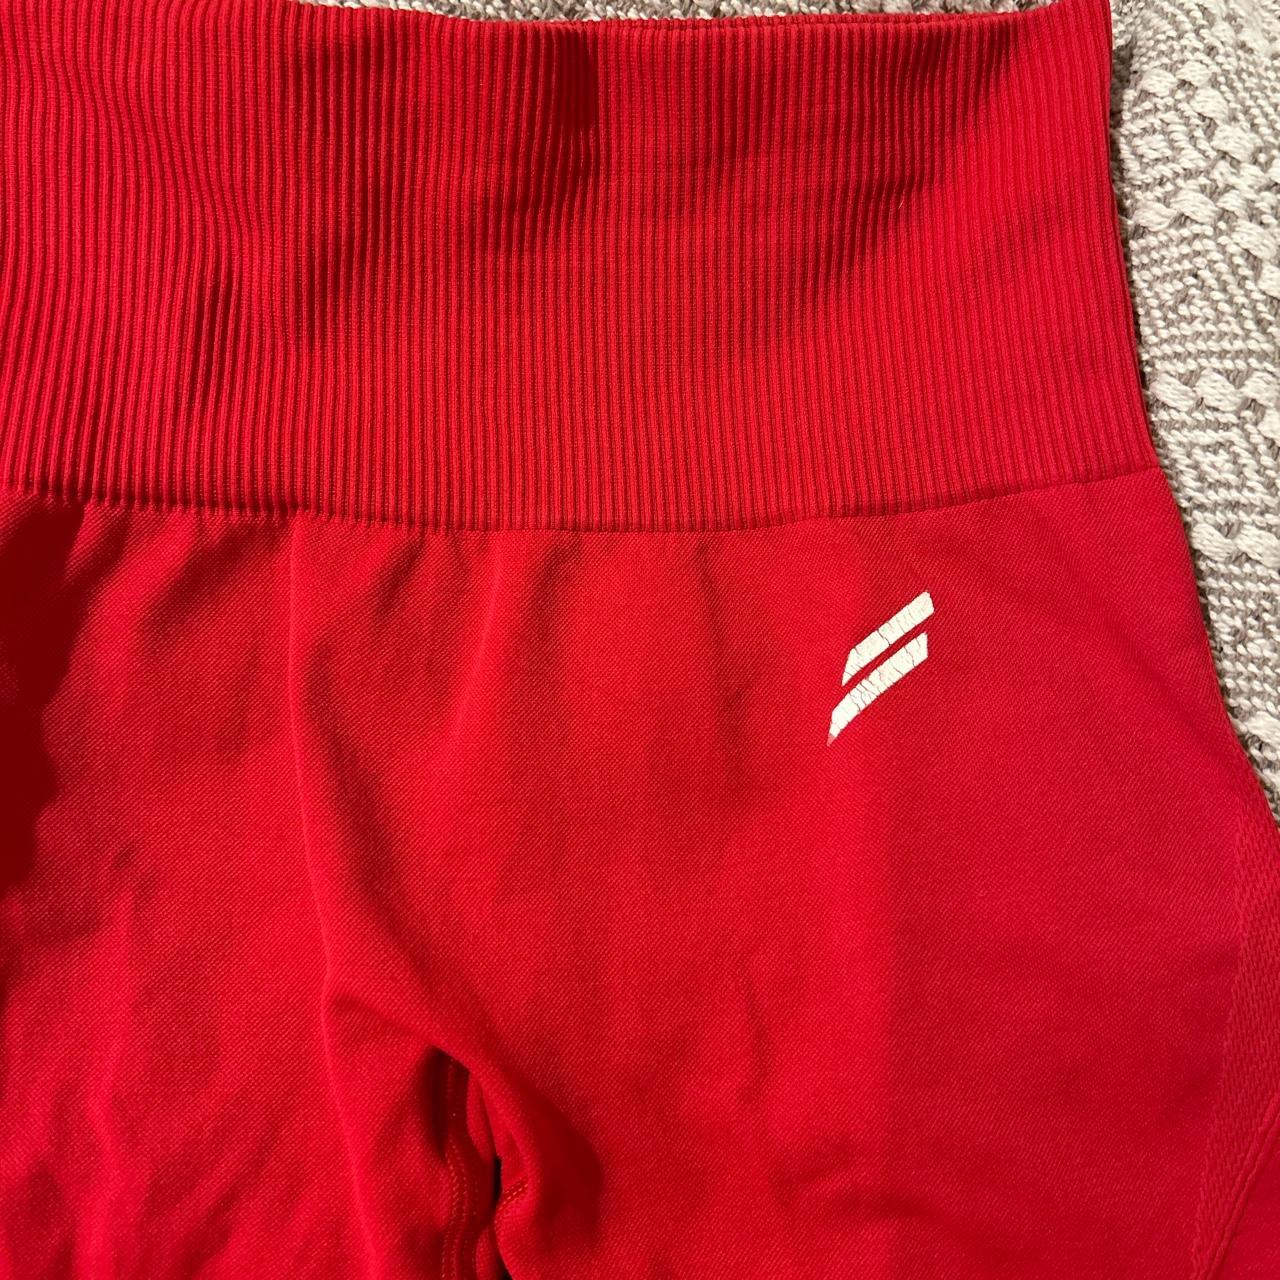 Do you even red seamless leggings - size S ️ worn a... - Depop